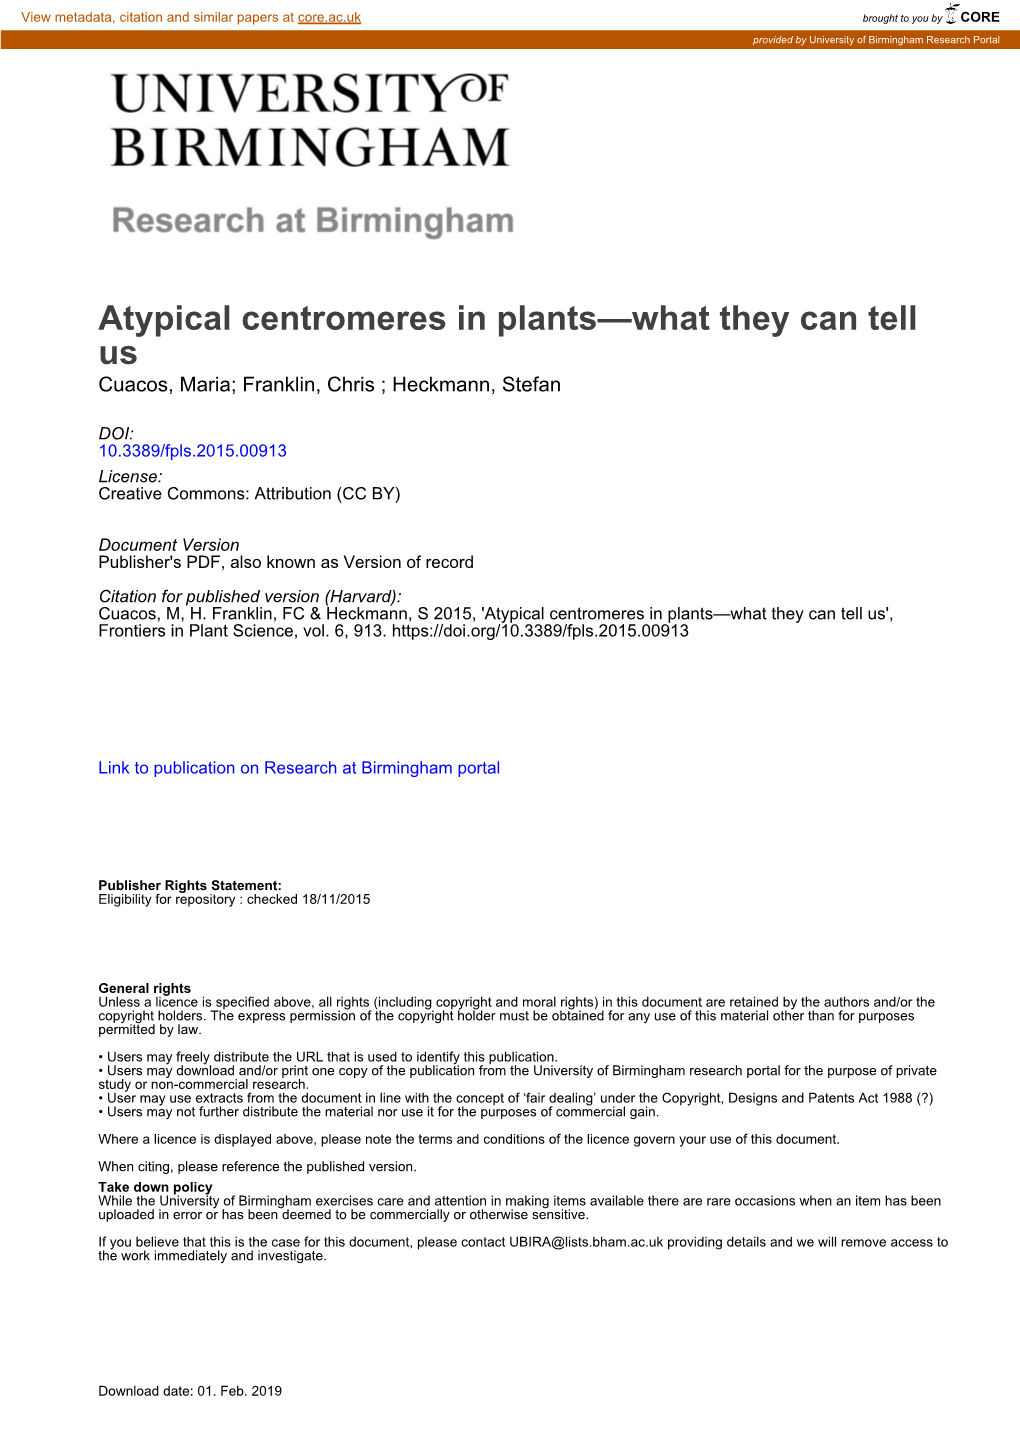 Atypical Centromeres in Plants—What They Can Tell Us Cuacos, Maria; Franklin, Chris ; Heckmann, Stefan